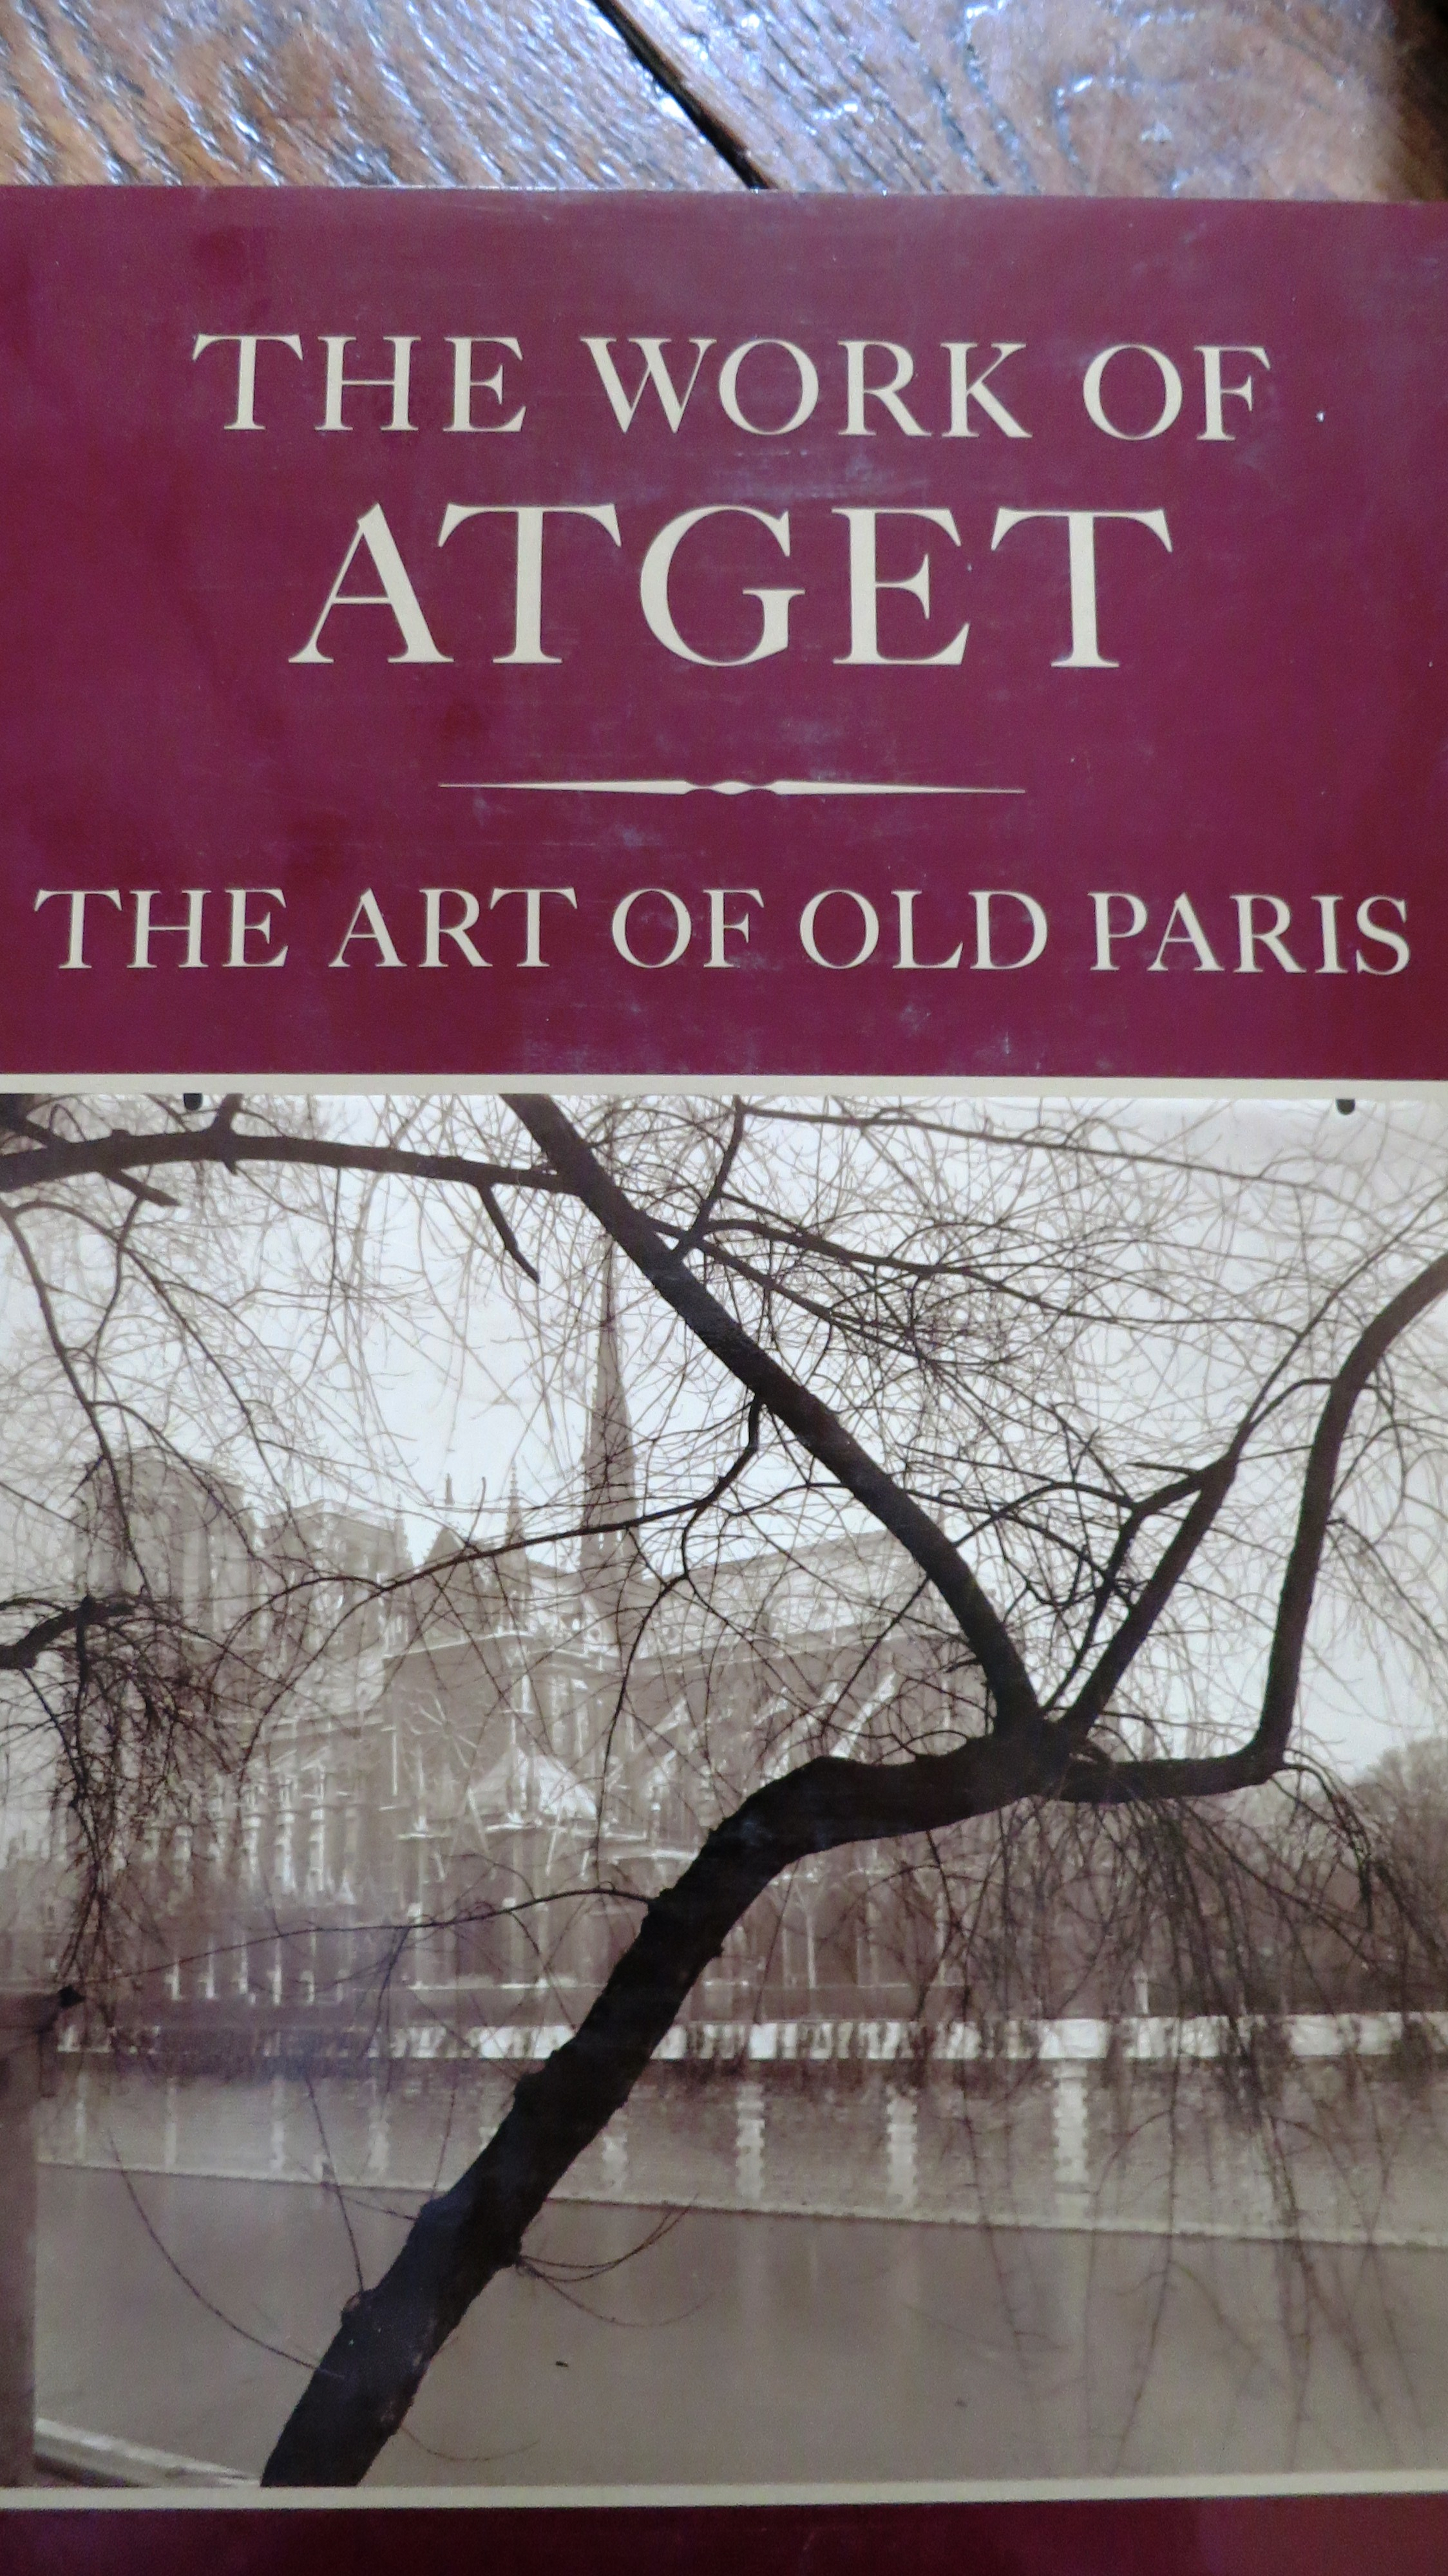 The work of Atget